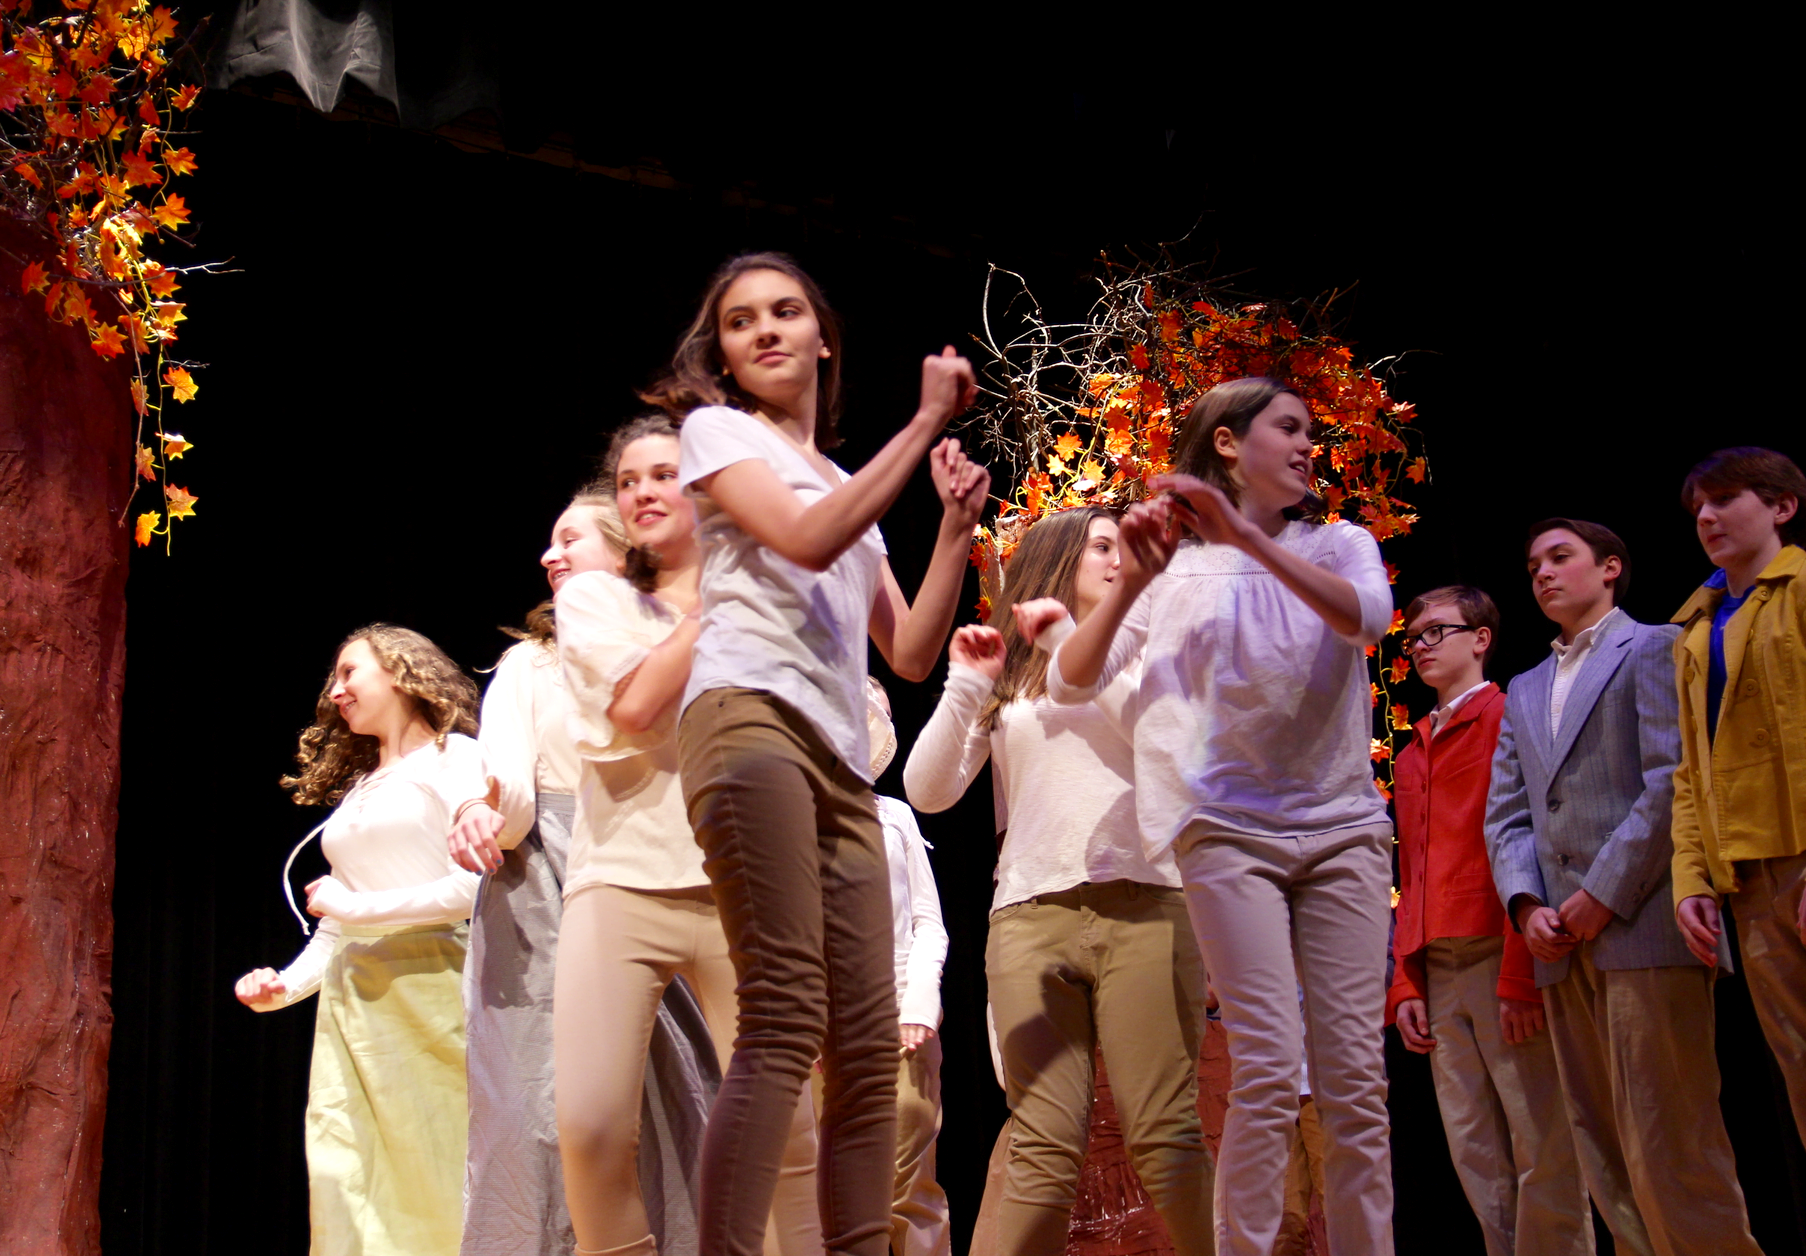 There are 92 students in the cast, directed by Matthew Tracey, assisted by EMS 7th Grade Social Studies teacher Jennifer Badillo with choreography by Scott Sisbarro from St. Saviour’s School of Dance in Greenwich. Photo: Leslie Yager